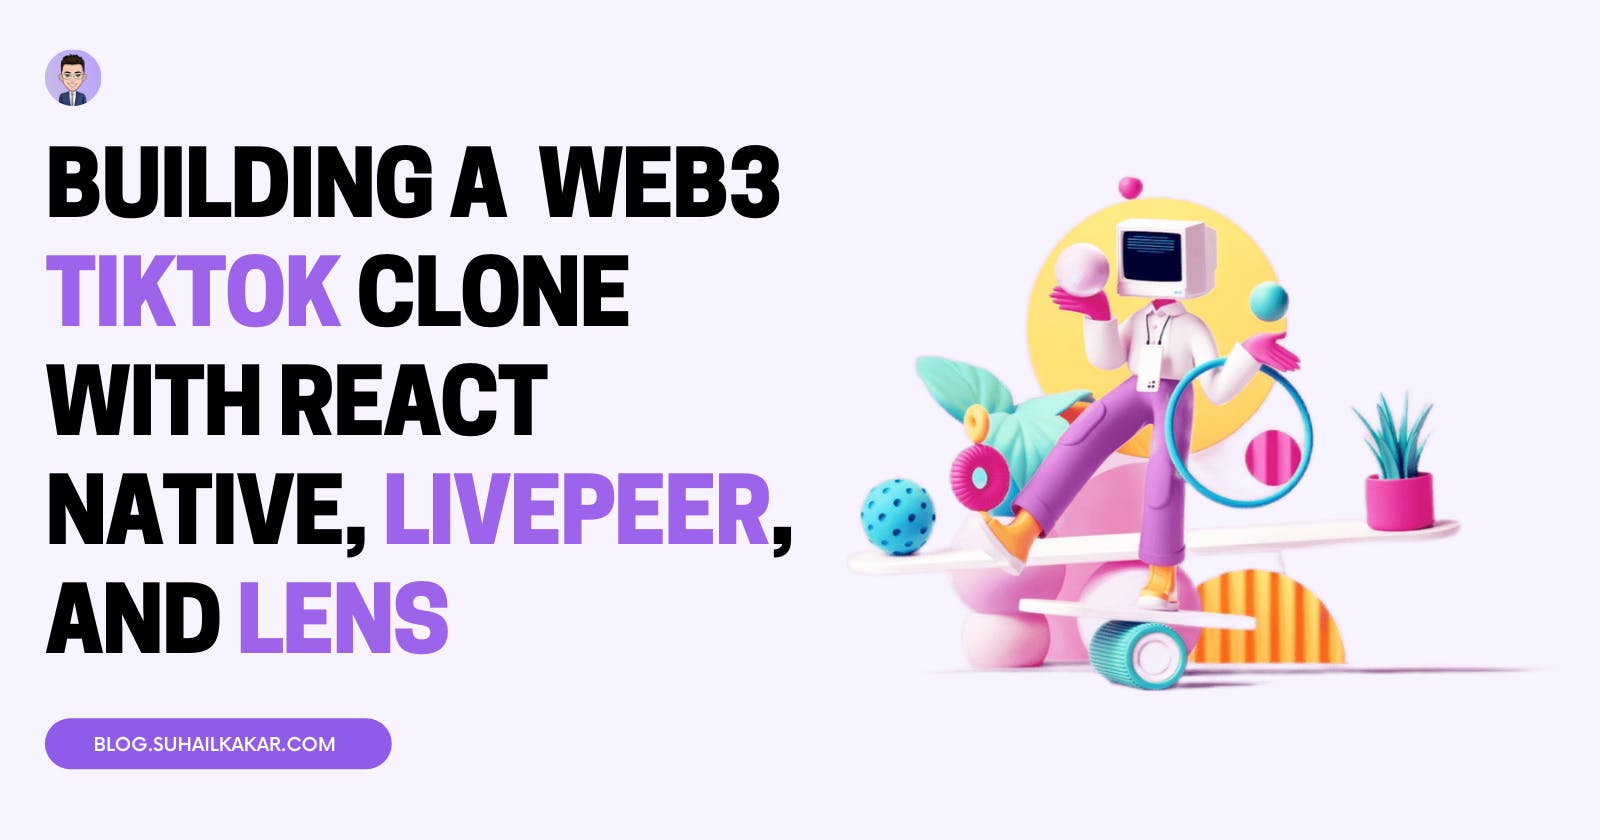 Building a Full Stack Web3 TikTok Clone with React Native, Livepeer, and Lens Protocol